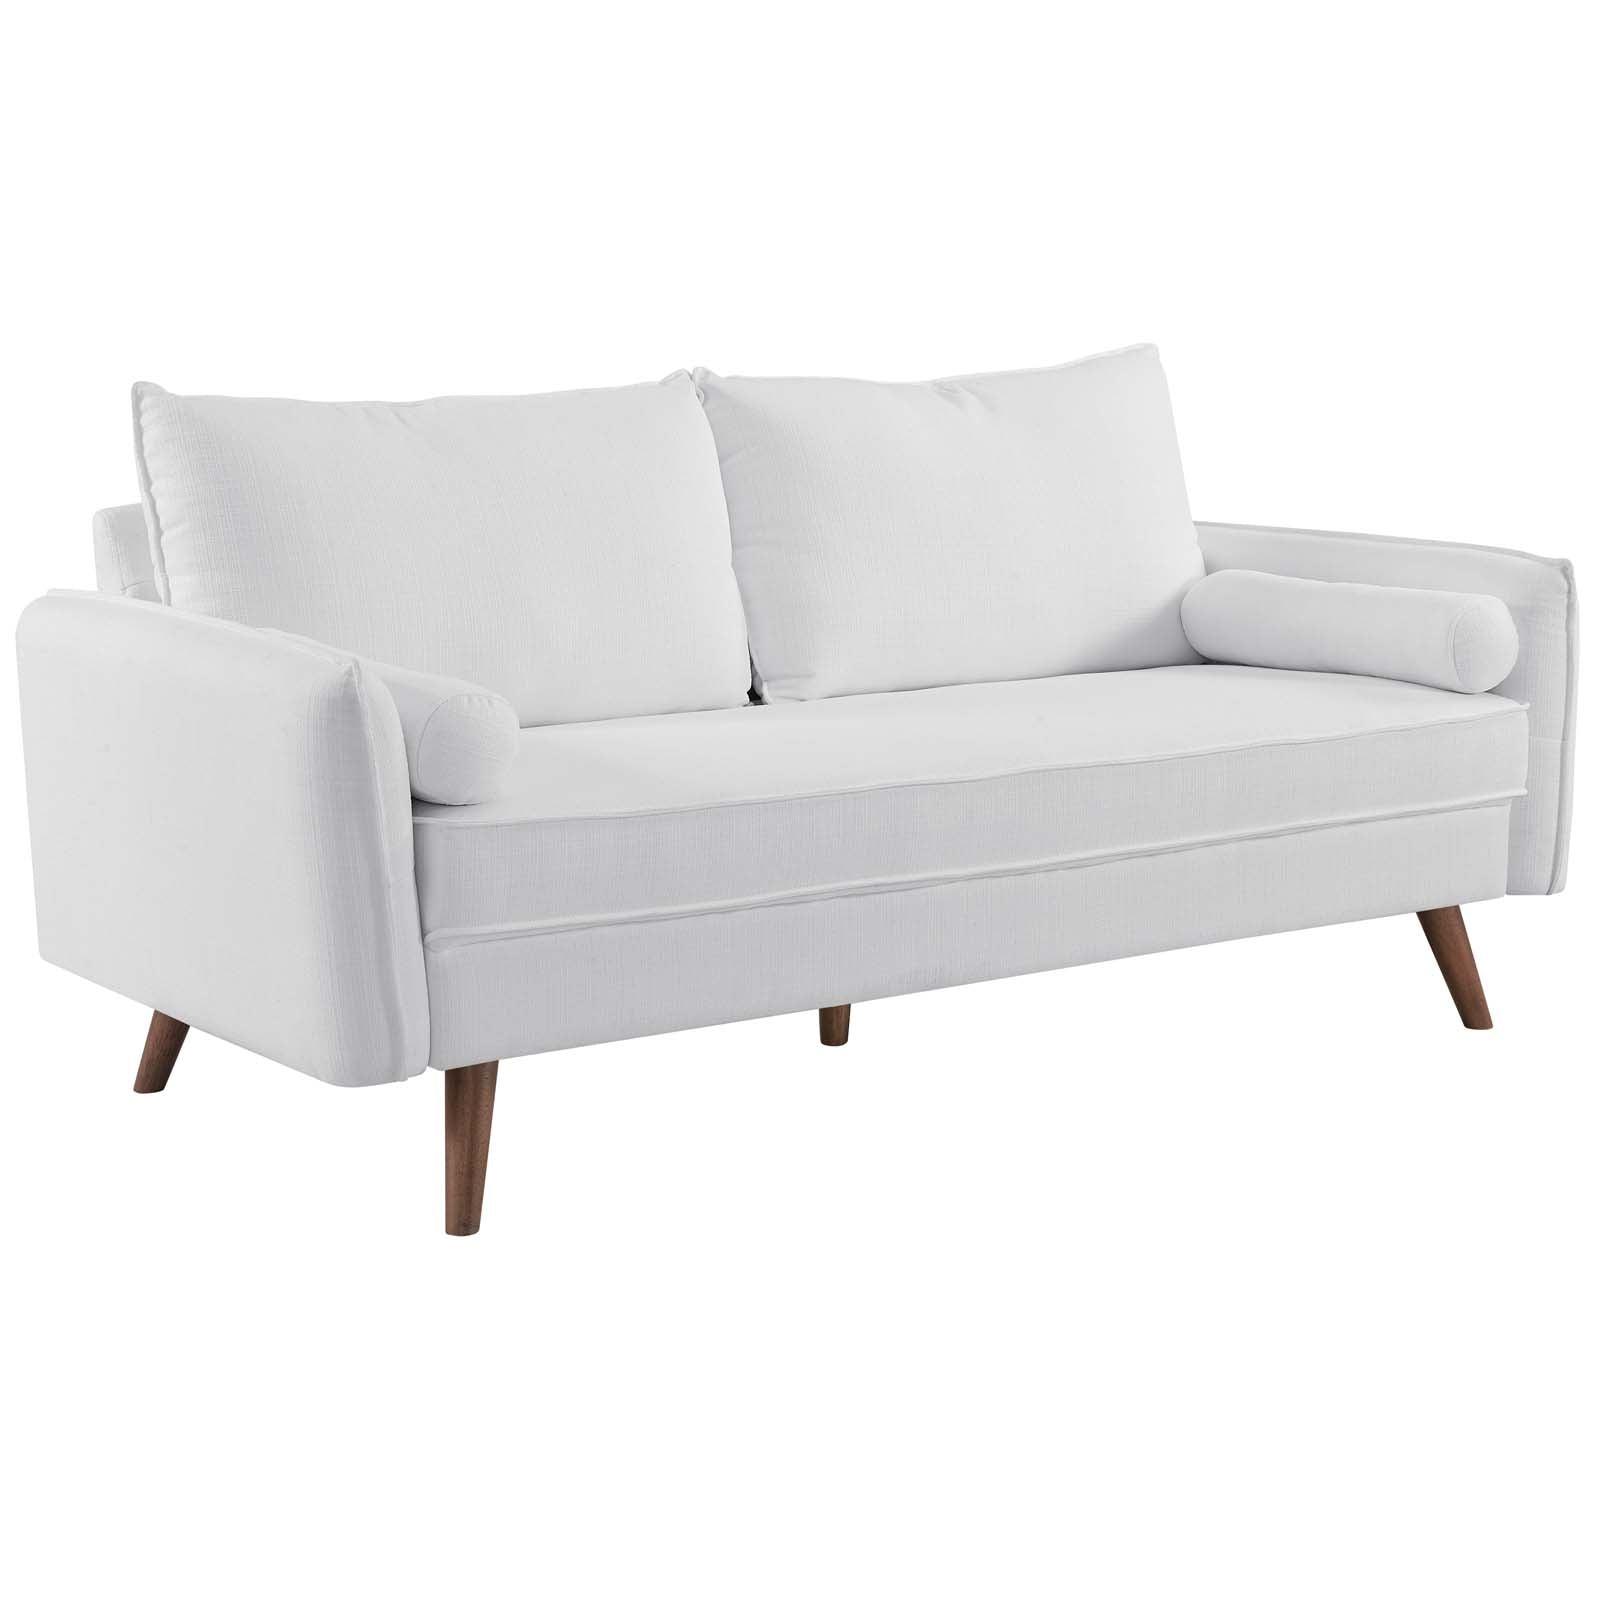 Modway Revive Upholstered Fabric Sofa FredCo